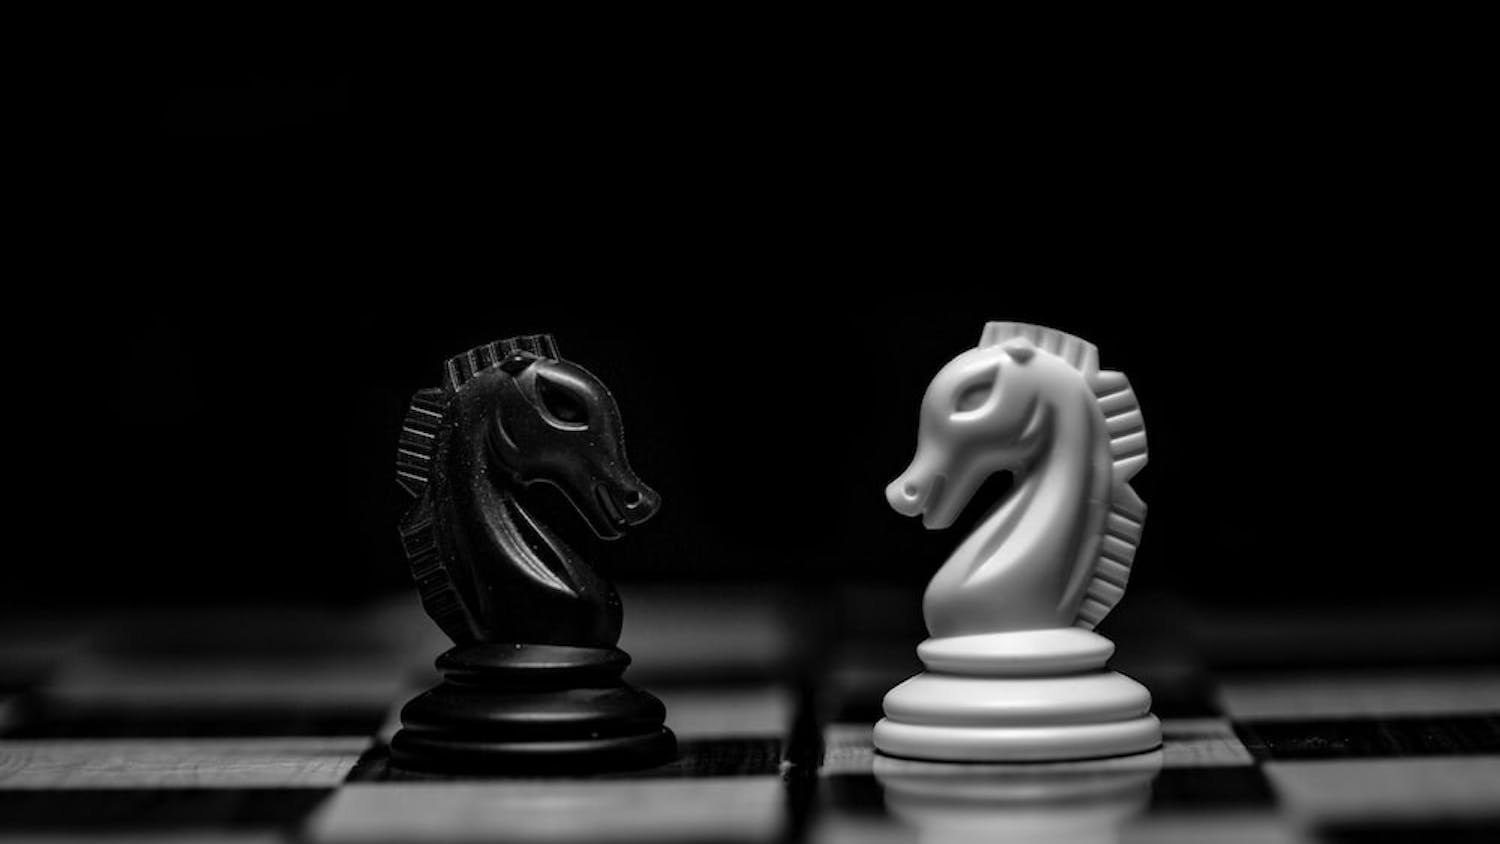 Opposing knights on a chessboard | Source: Hassan Pasha on Unsplash